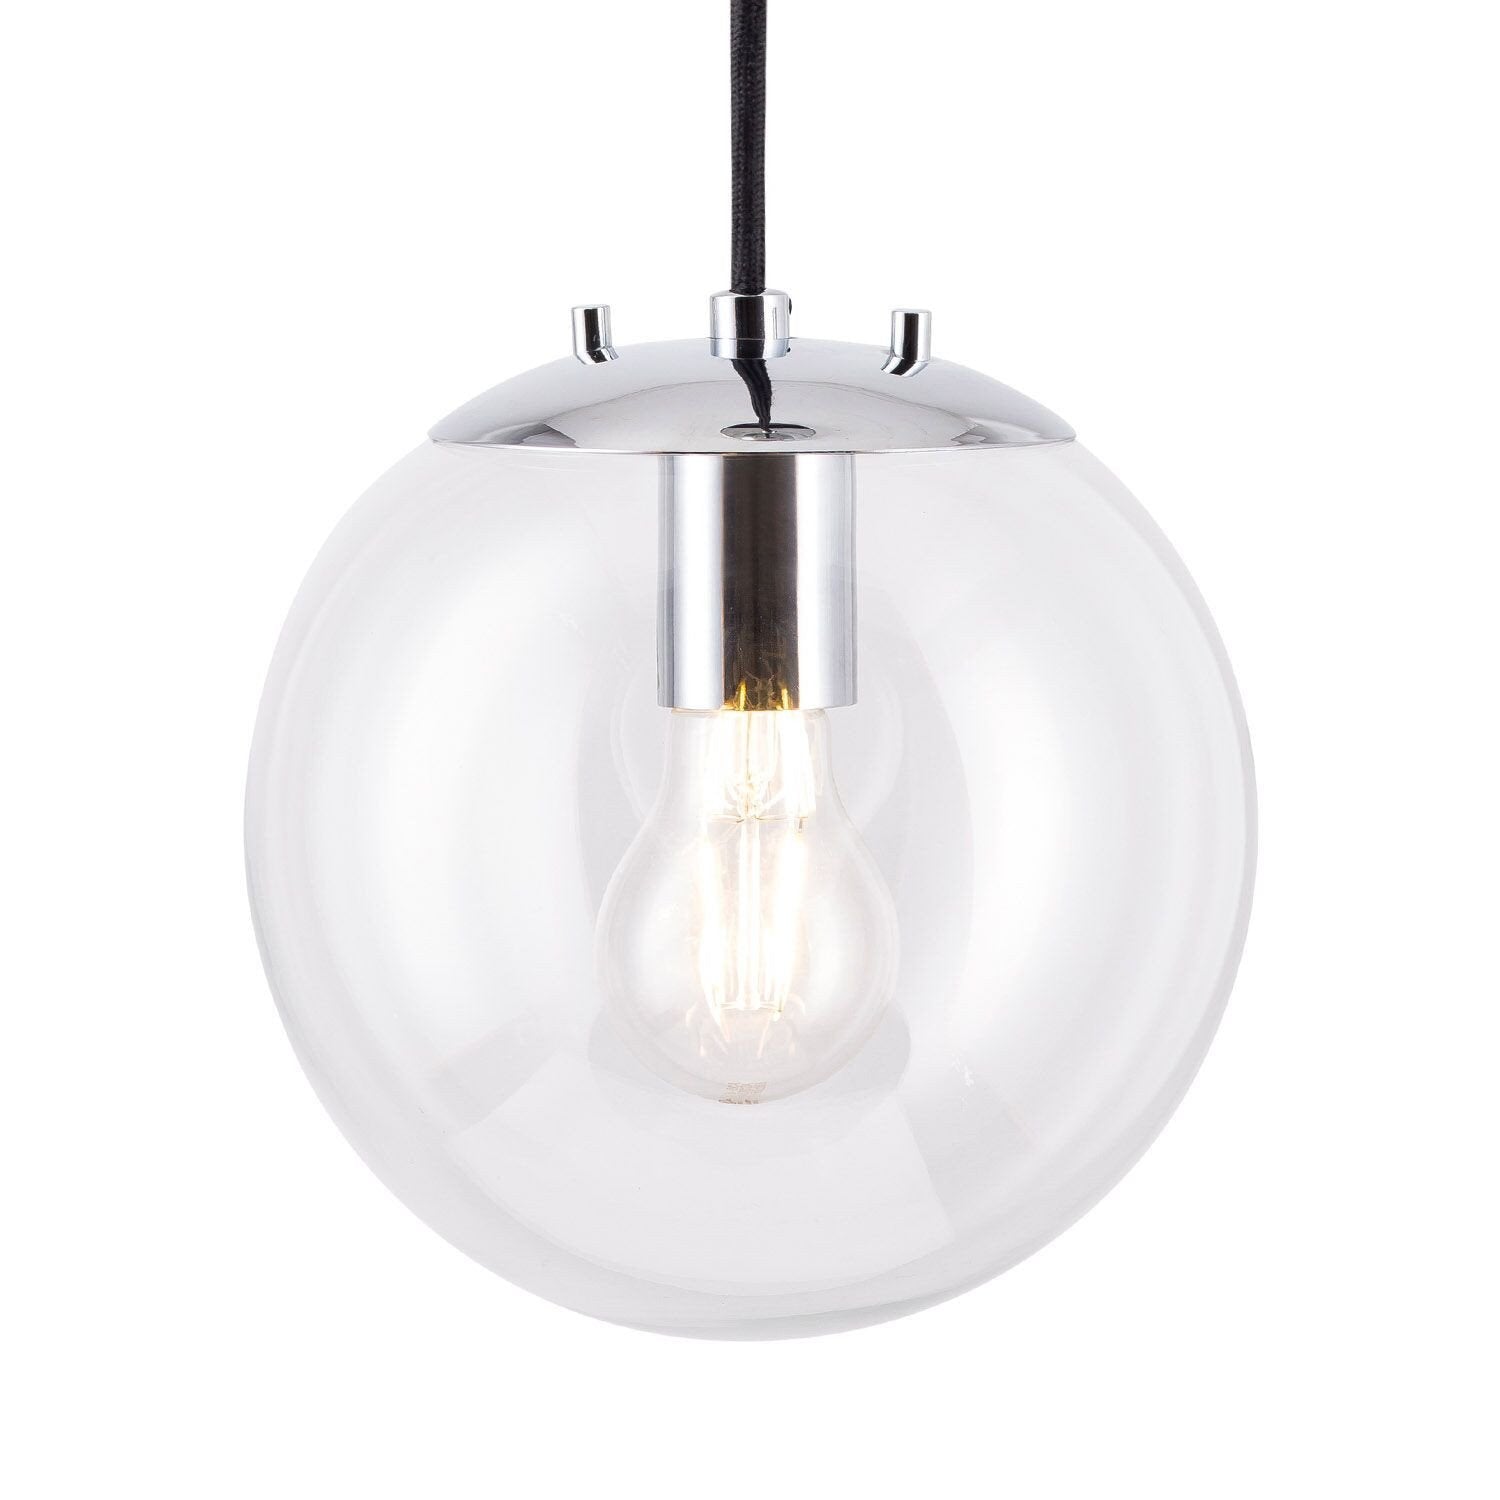 Sferra LED Industrial Kitchen Pendant Light - REPLACEMENT CLEAR GLASS